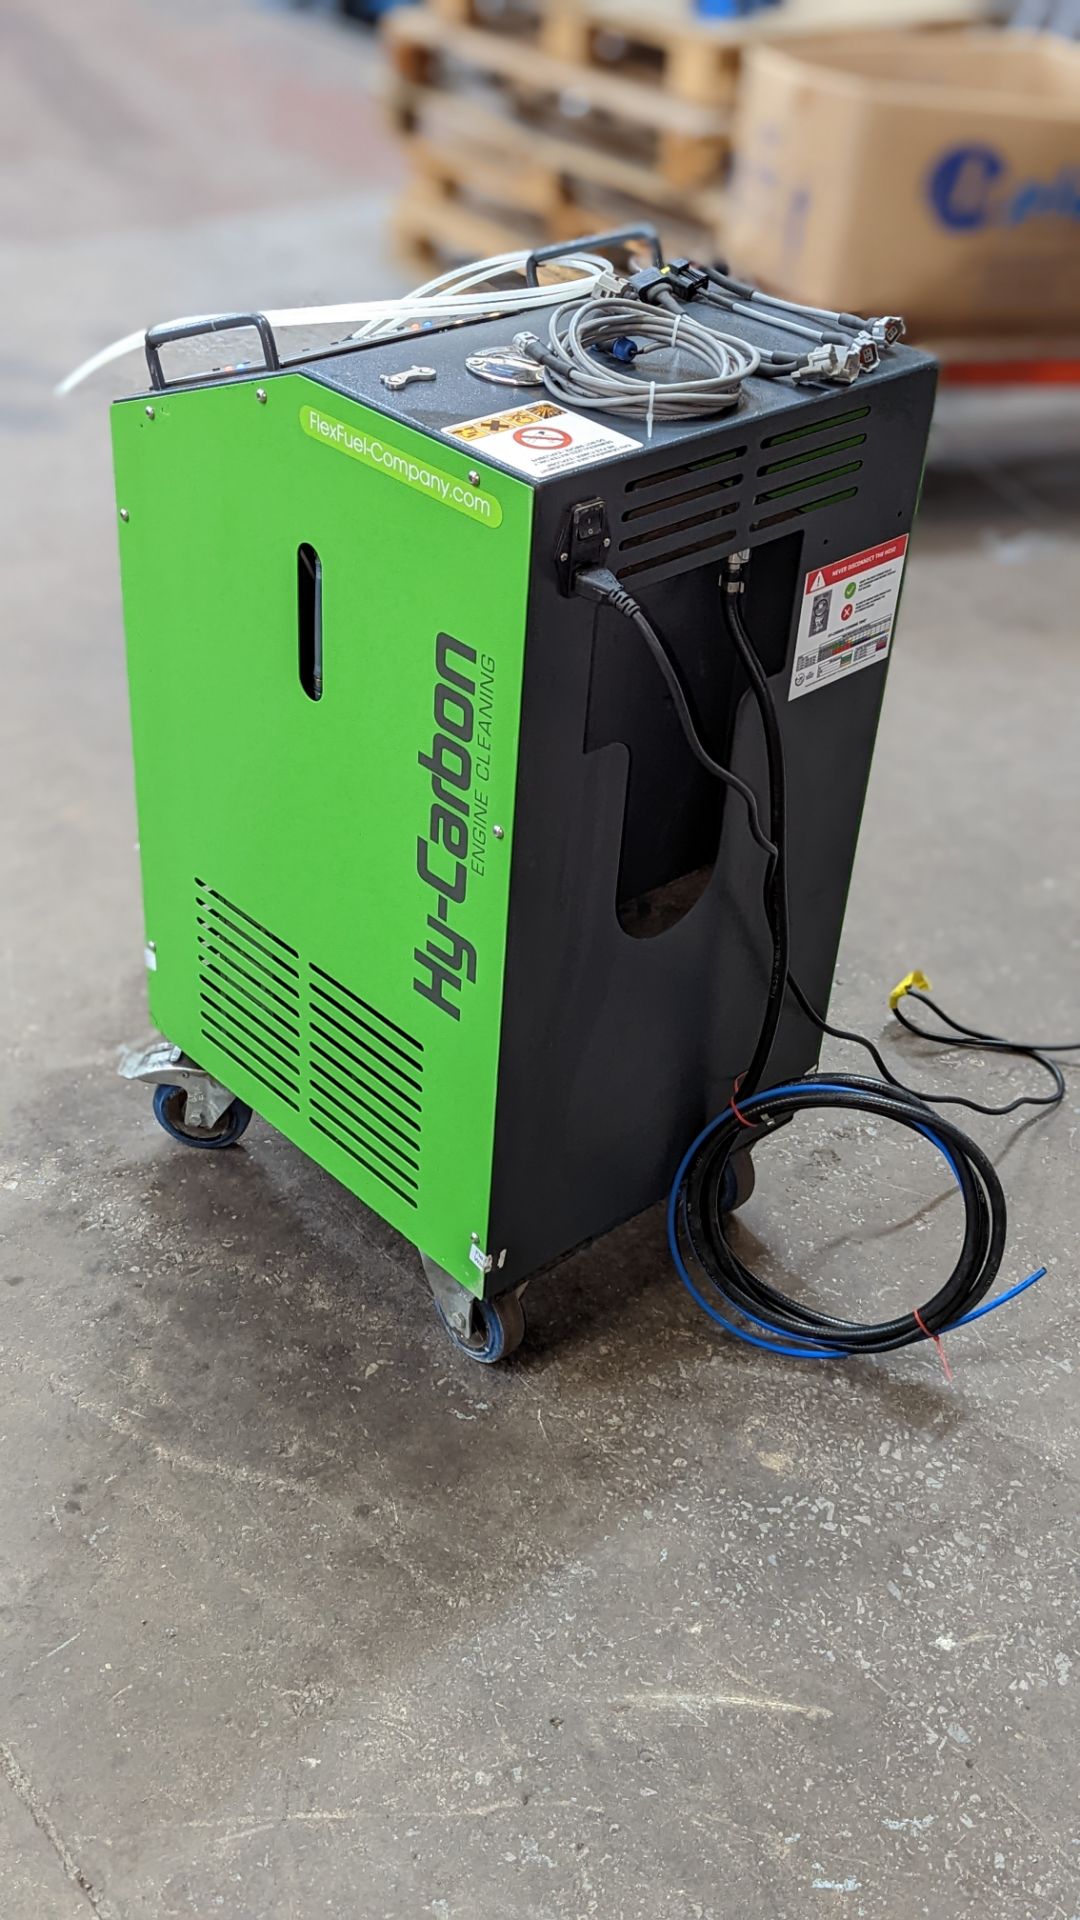 Flex Fuel Hy-Carbon EGR Pilot 1000S engine cleaning machine including cover. Purchased new in 2019 - Image 16 of 19